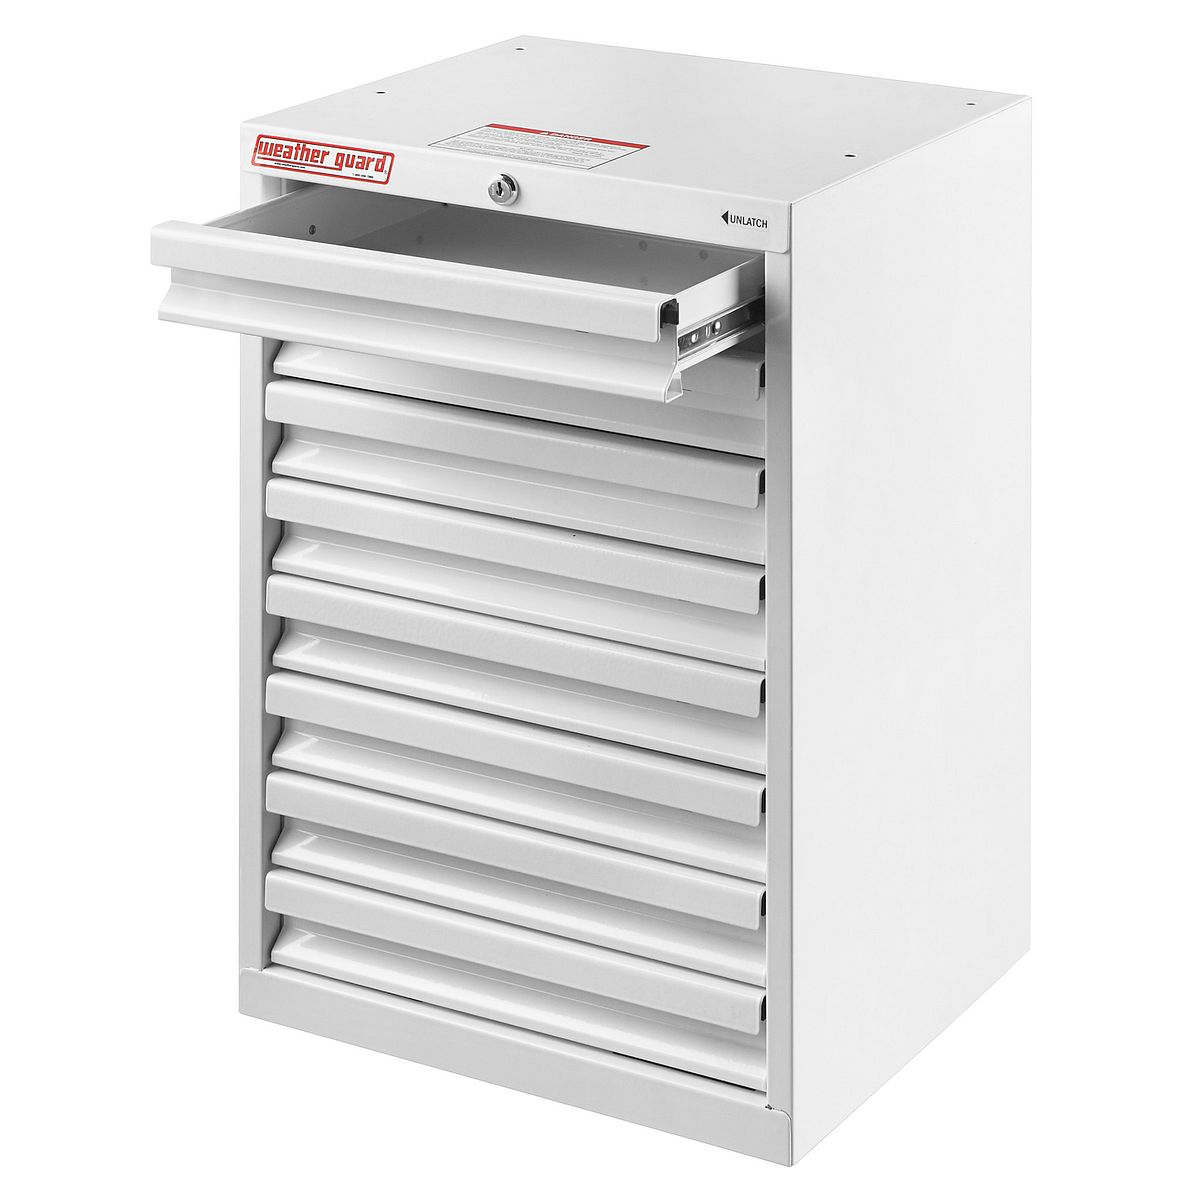 Cabinet - 8 Drawer - 24 in. x 16 in. x 14 in. Image